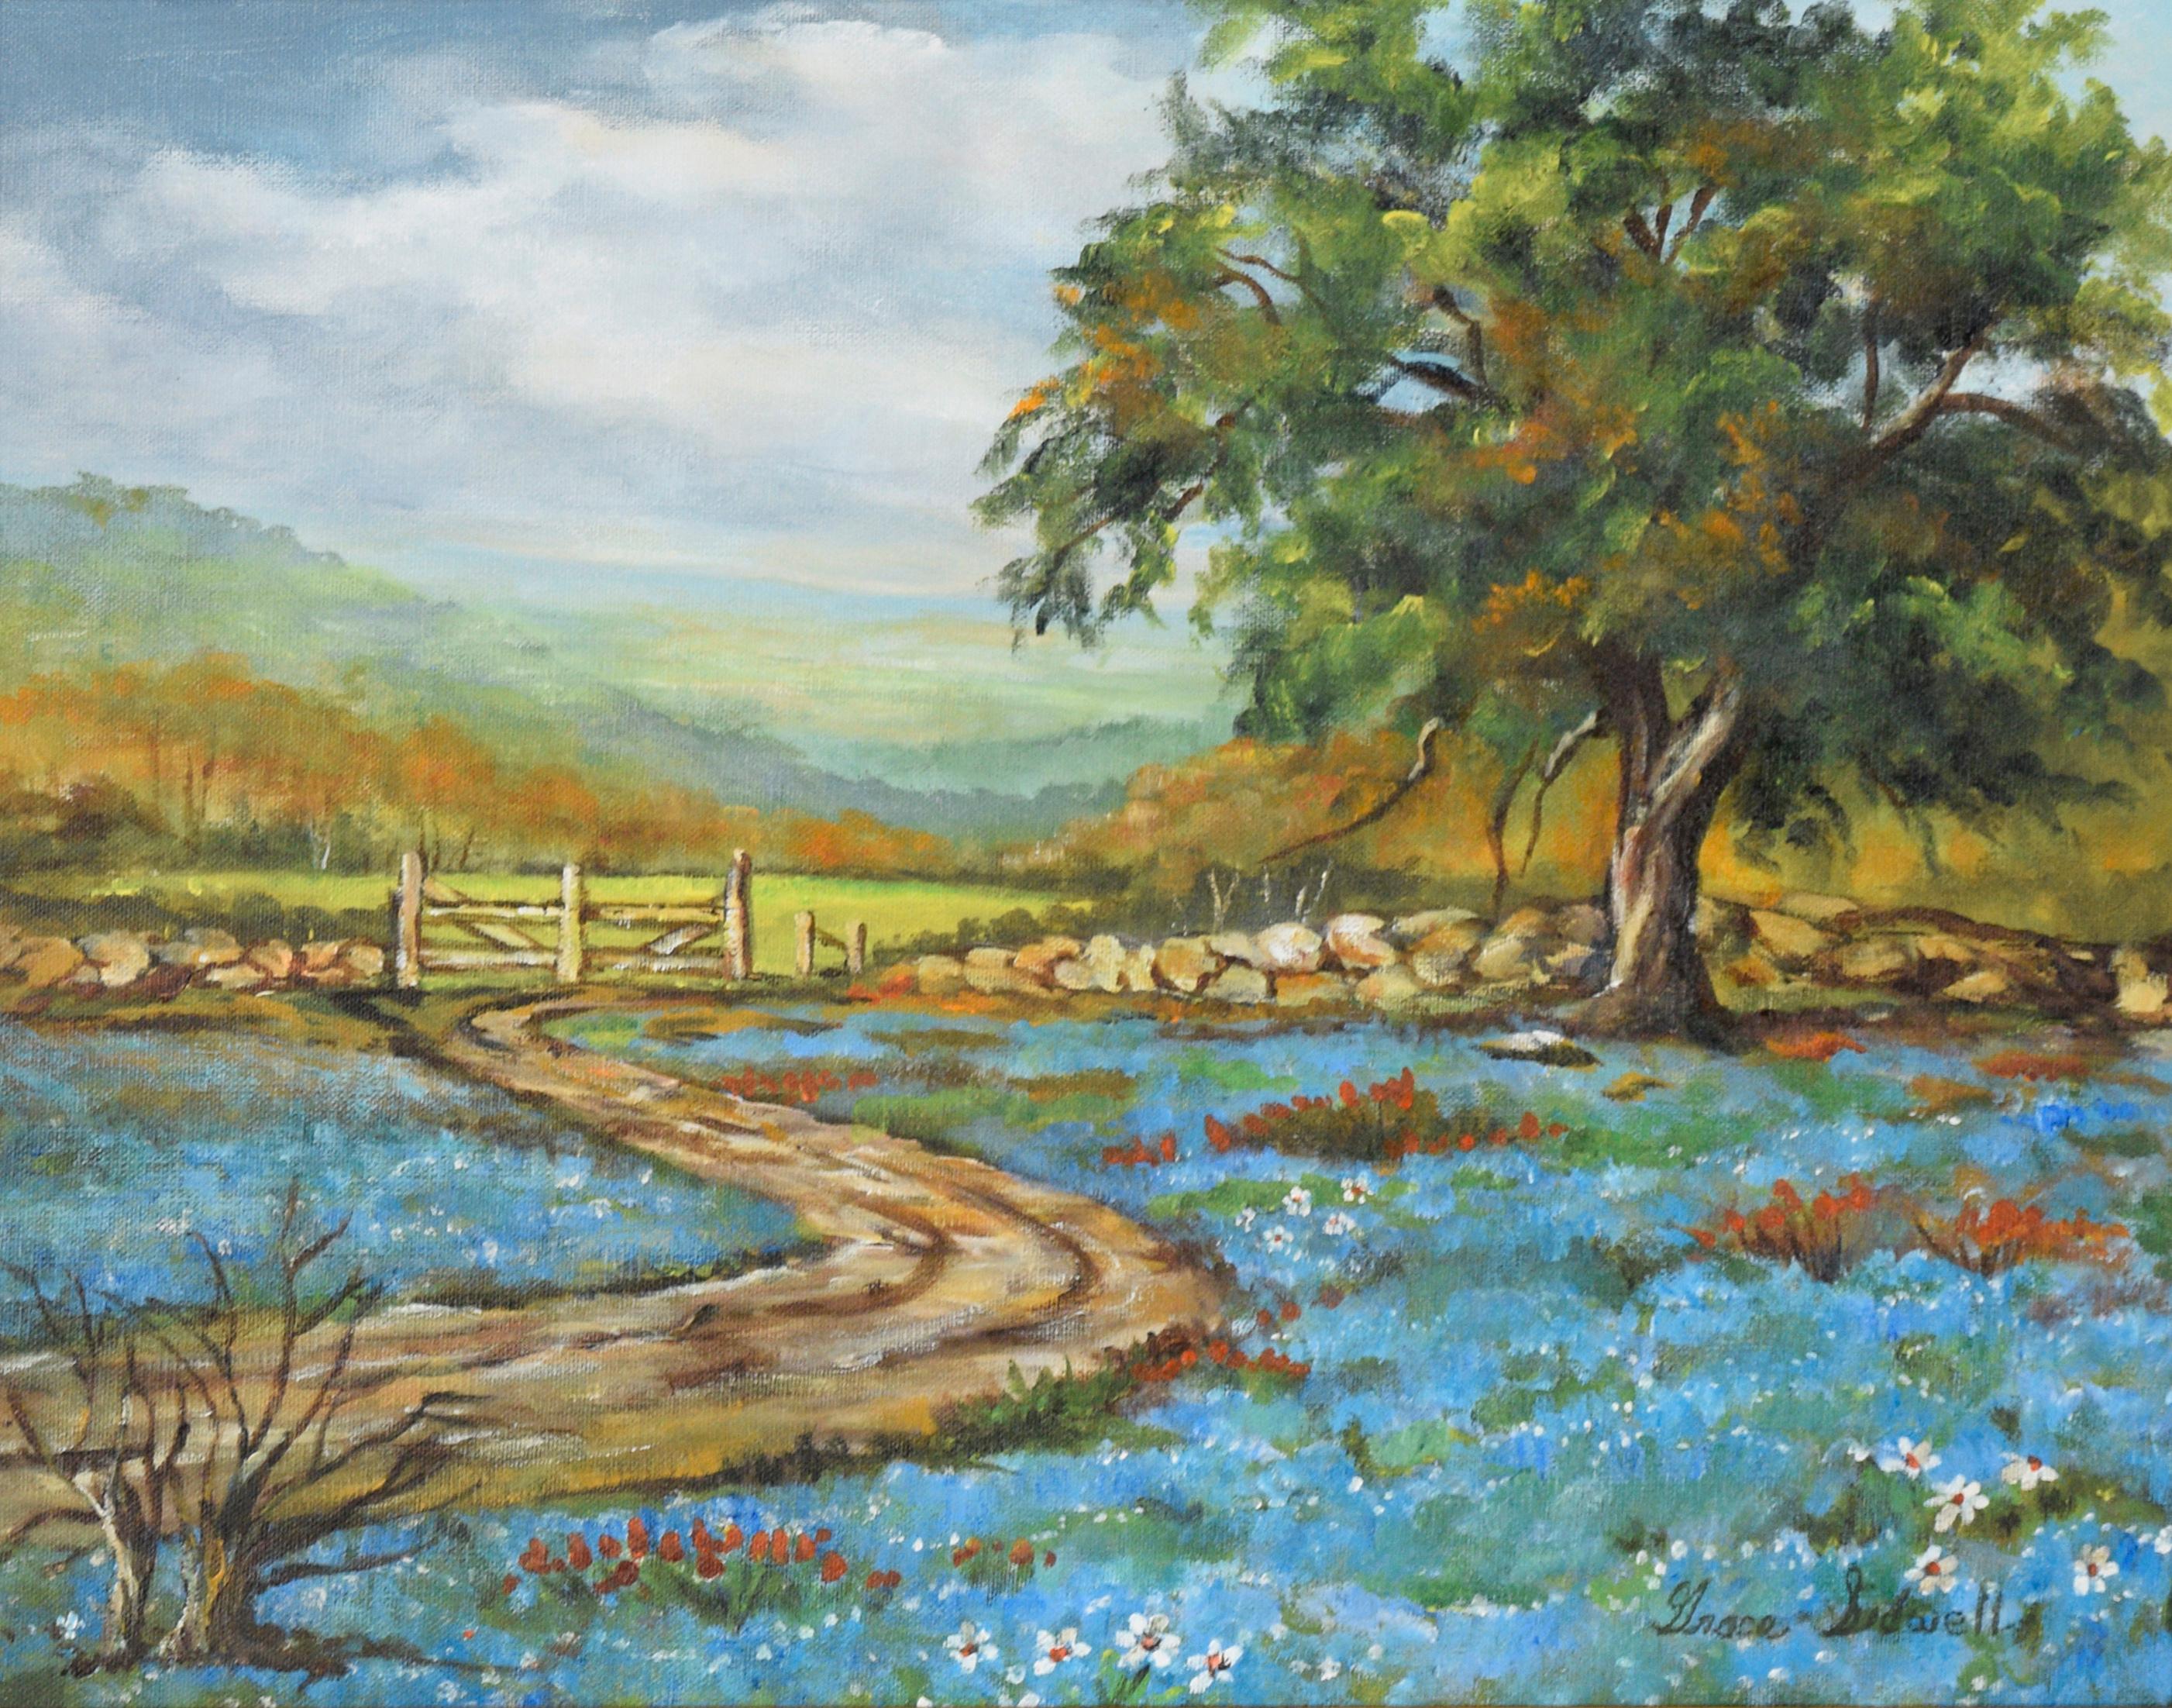 Wildflowers Blooming Under the Oak - Landscape - Painting by Grace Sidwell